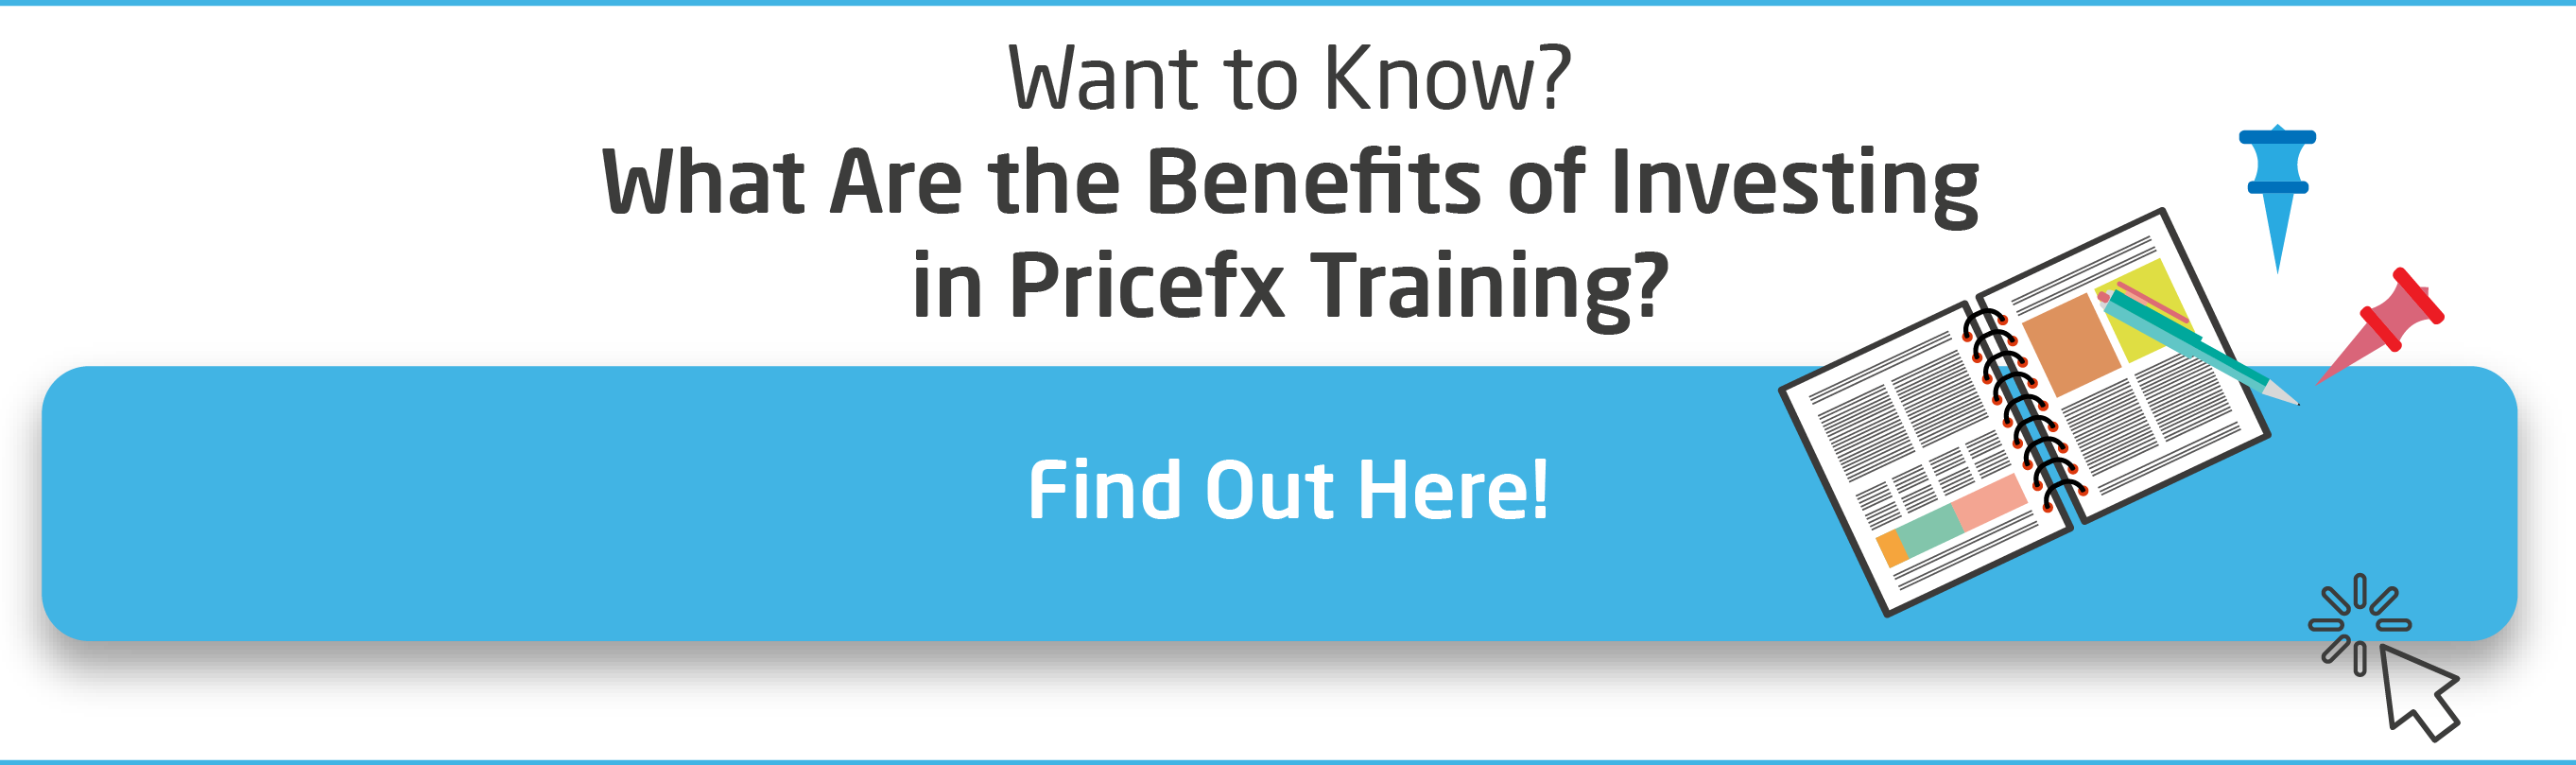 Benefits-of-Investing-in_Pricefx-Training